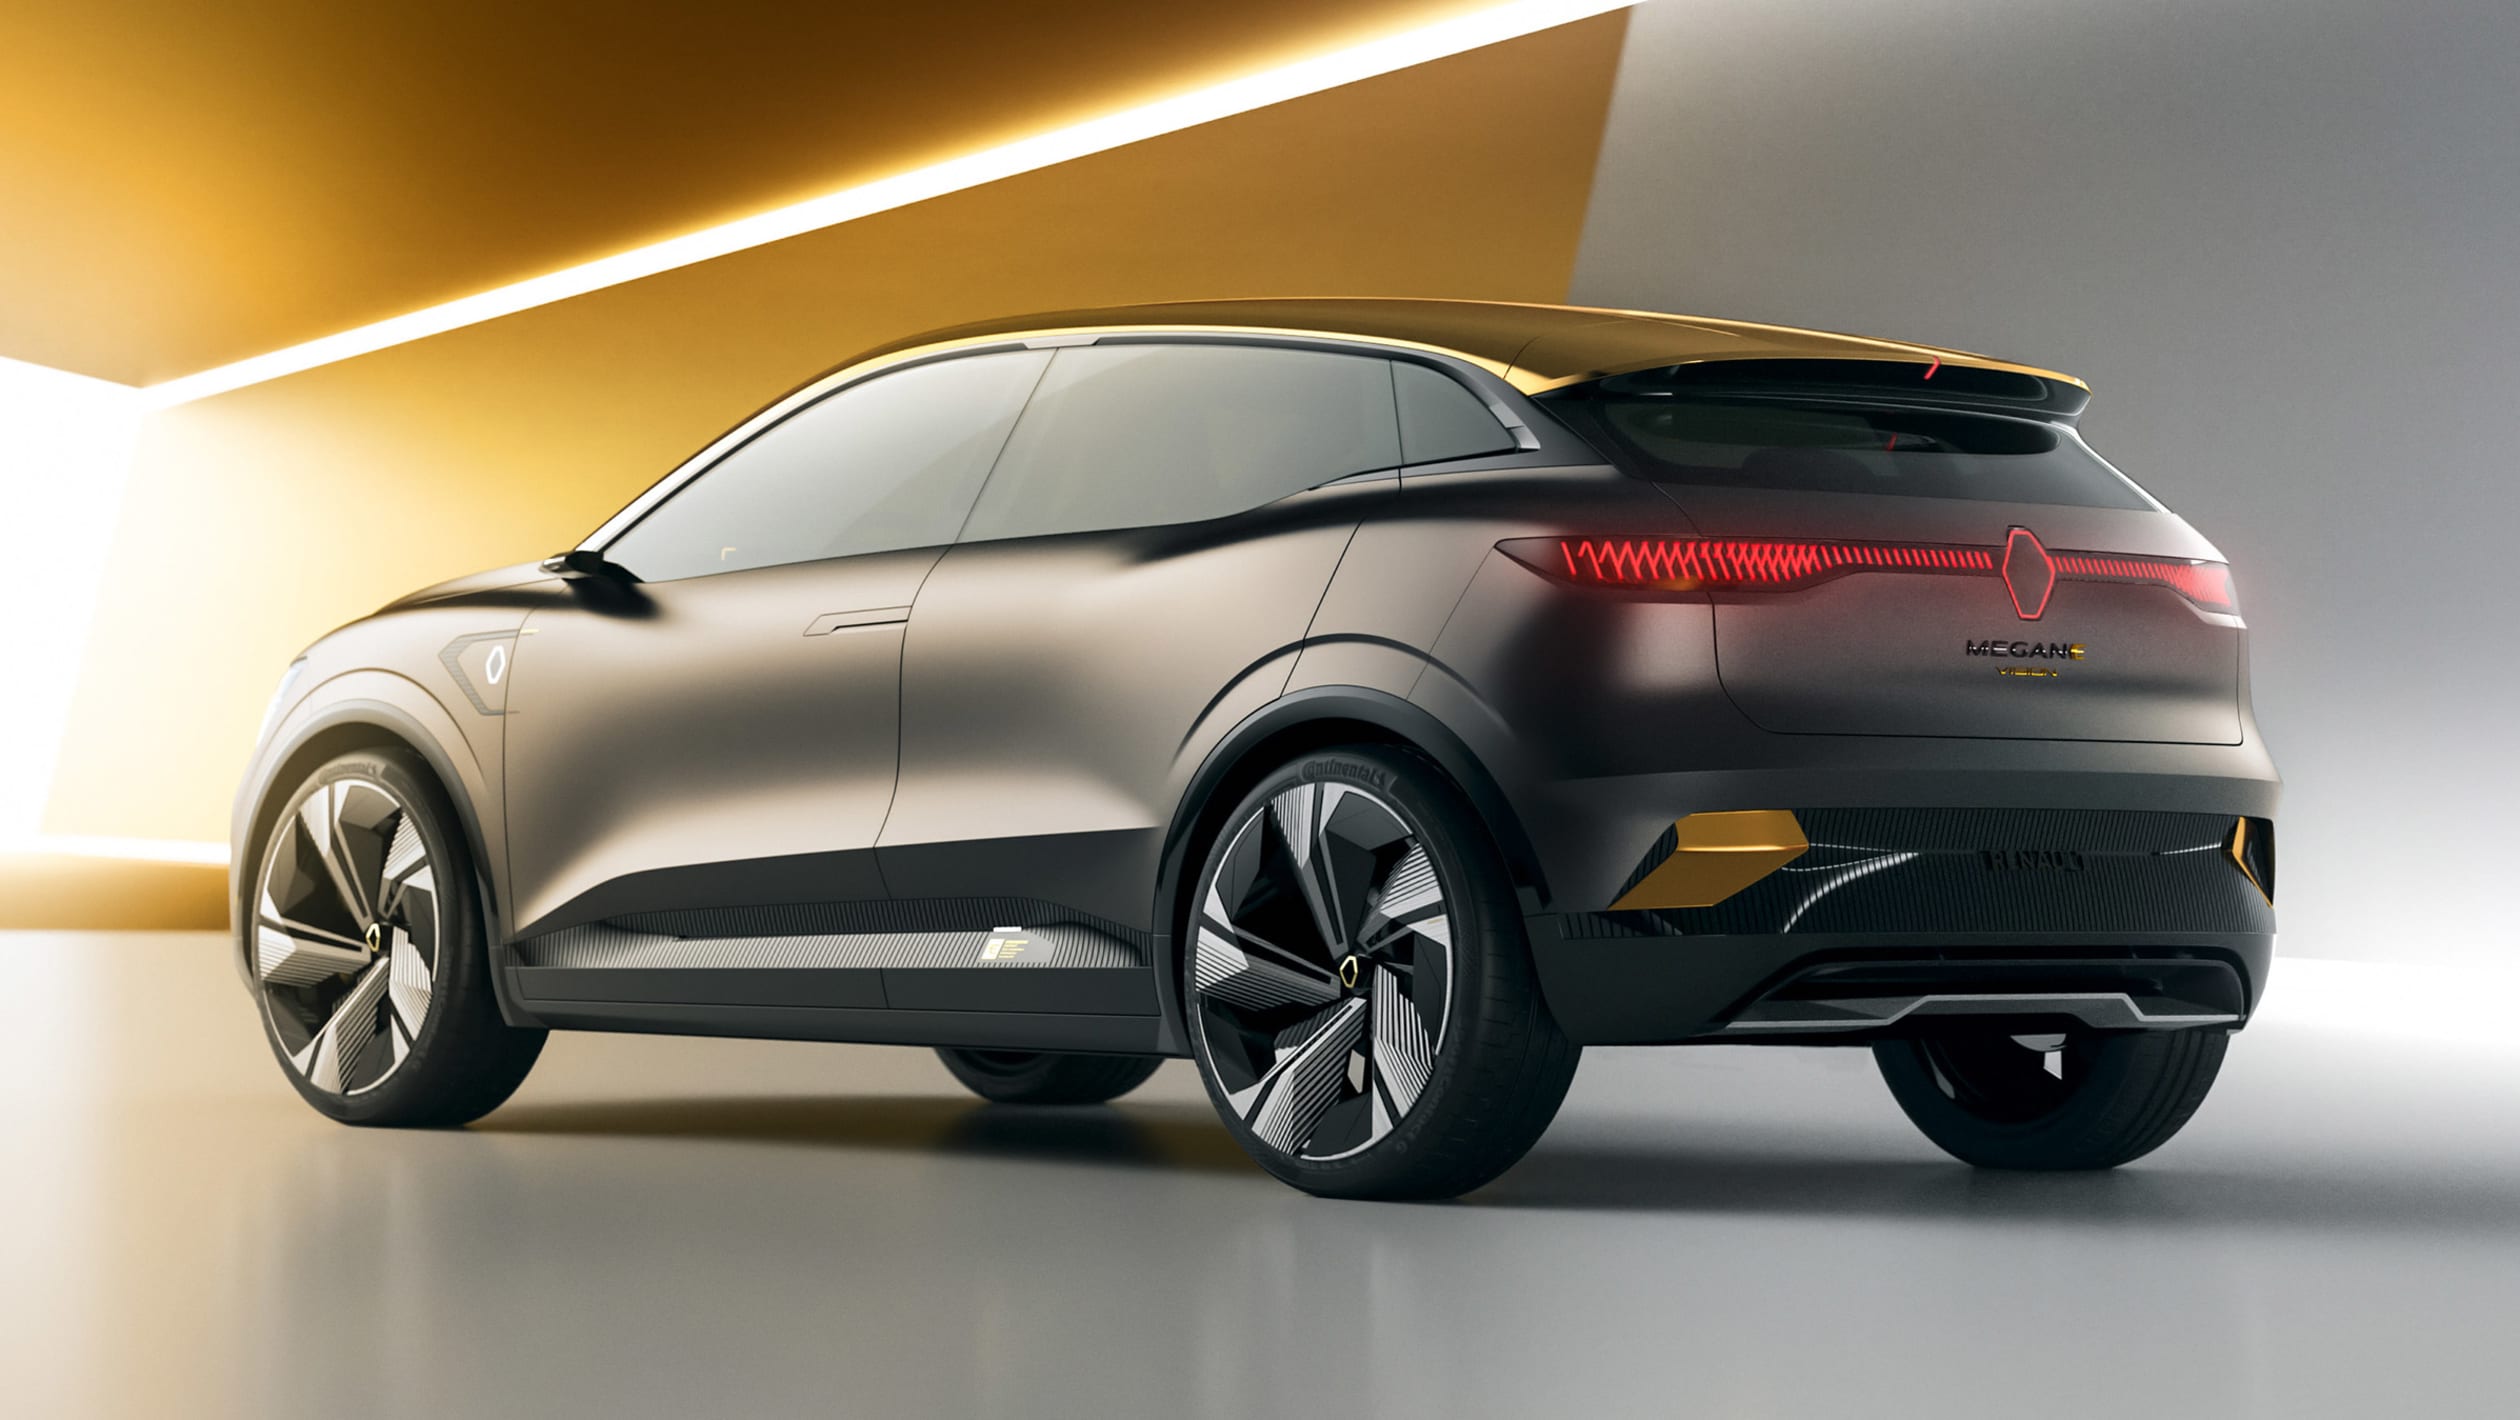 Renault Previews Electric Megane Suv For 2021 Automotive Daily